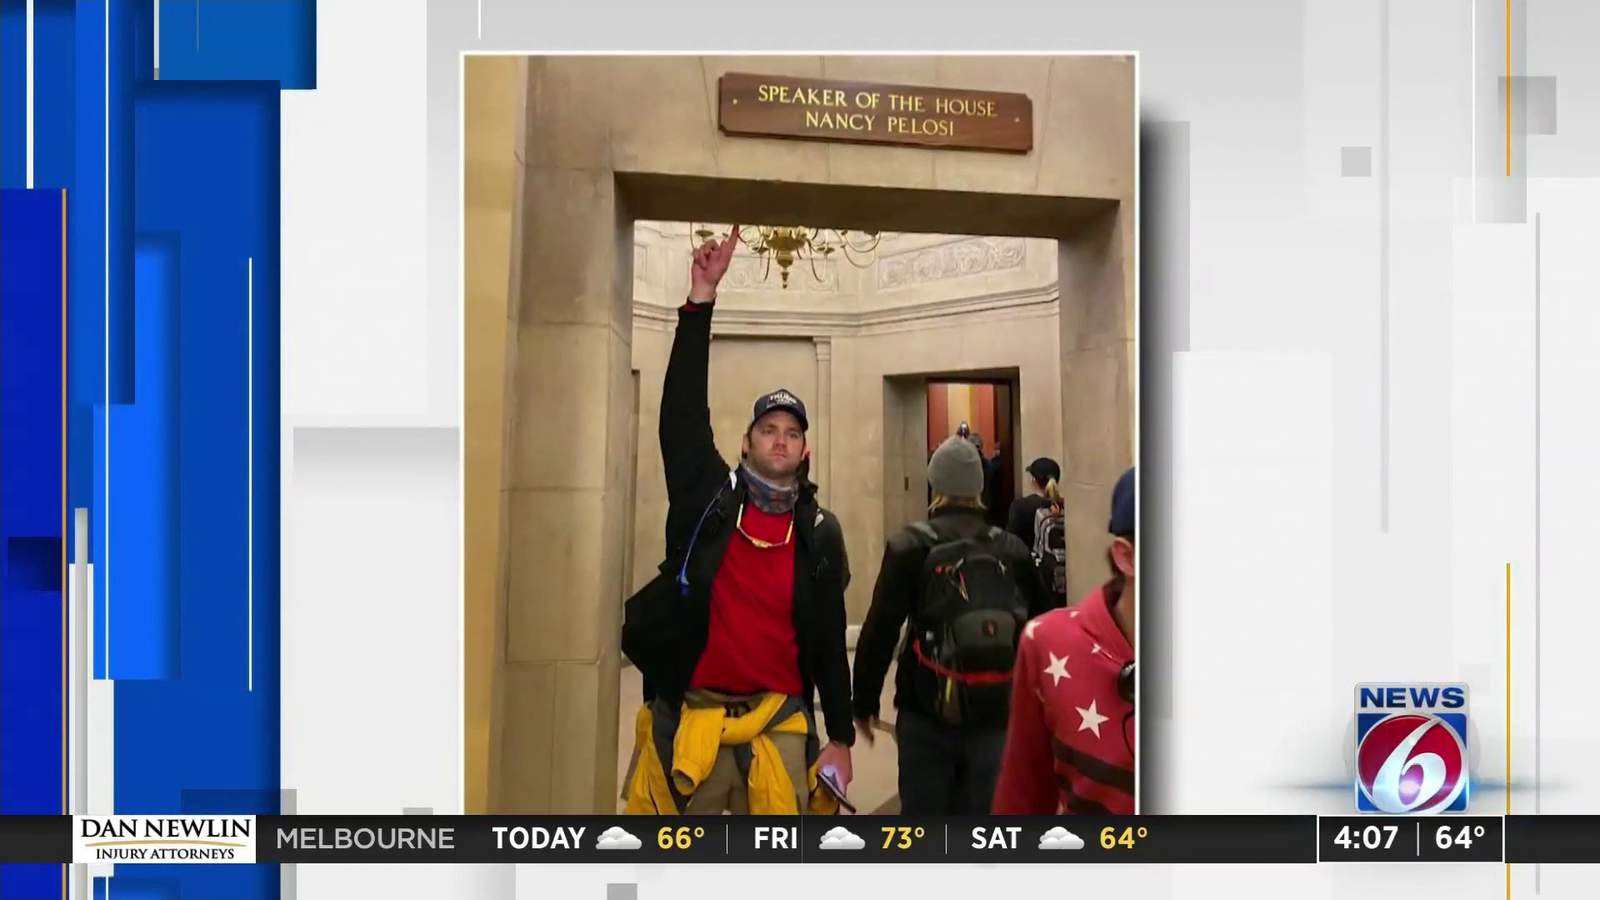 ‘We are in the Rotunda:’ Sanford firefighter’s video shows him in Capitol during siege, FBI says